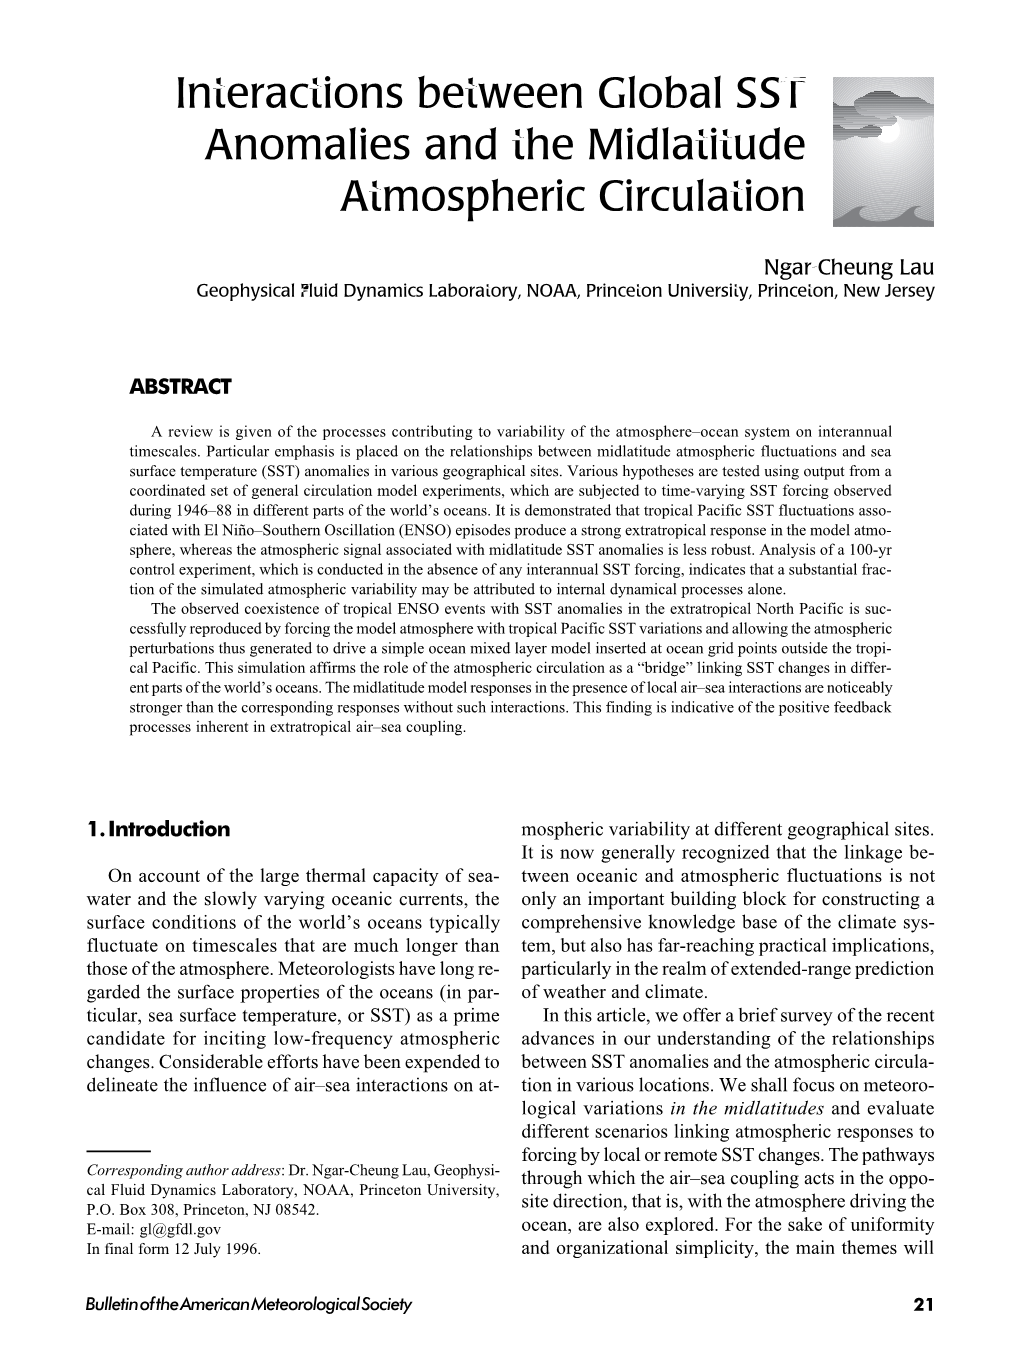 Interactions Between Global SST Anomalies and the Midlatitude Atmospheric Circulation